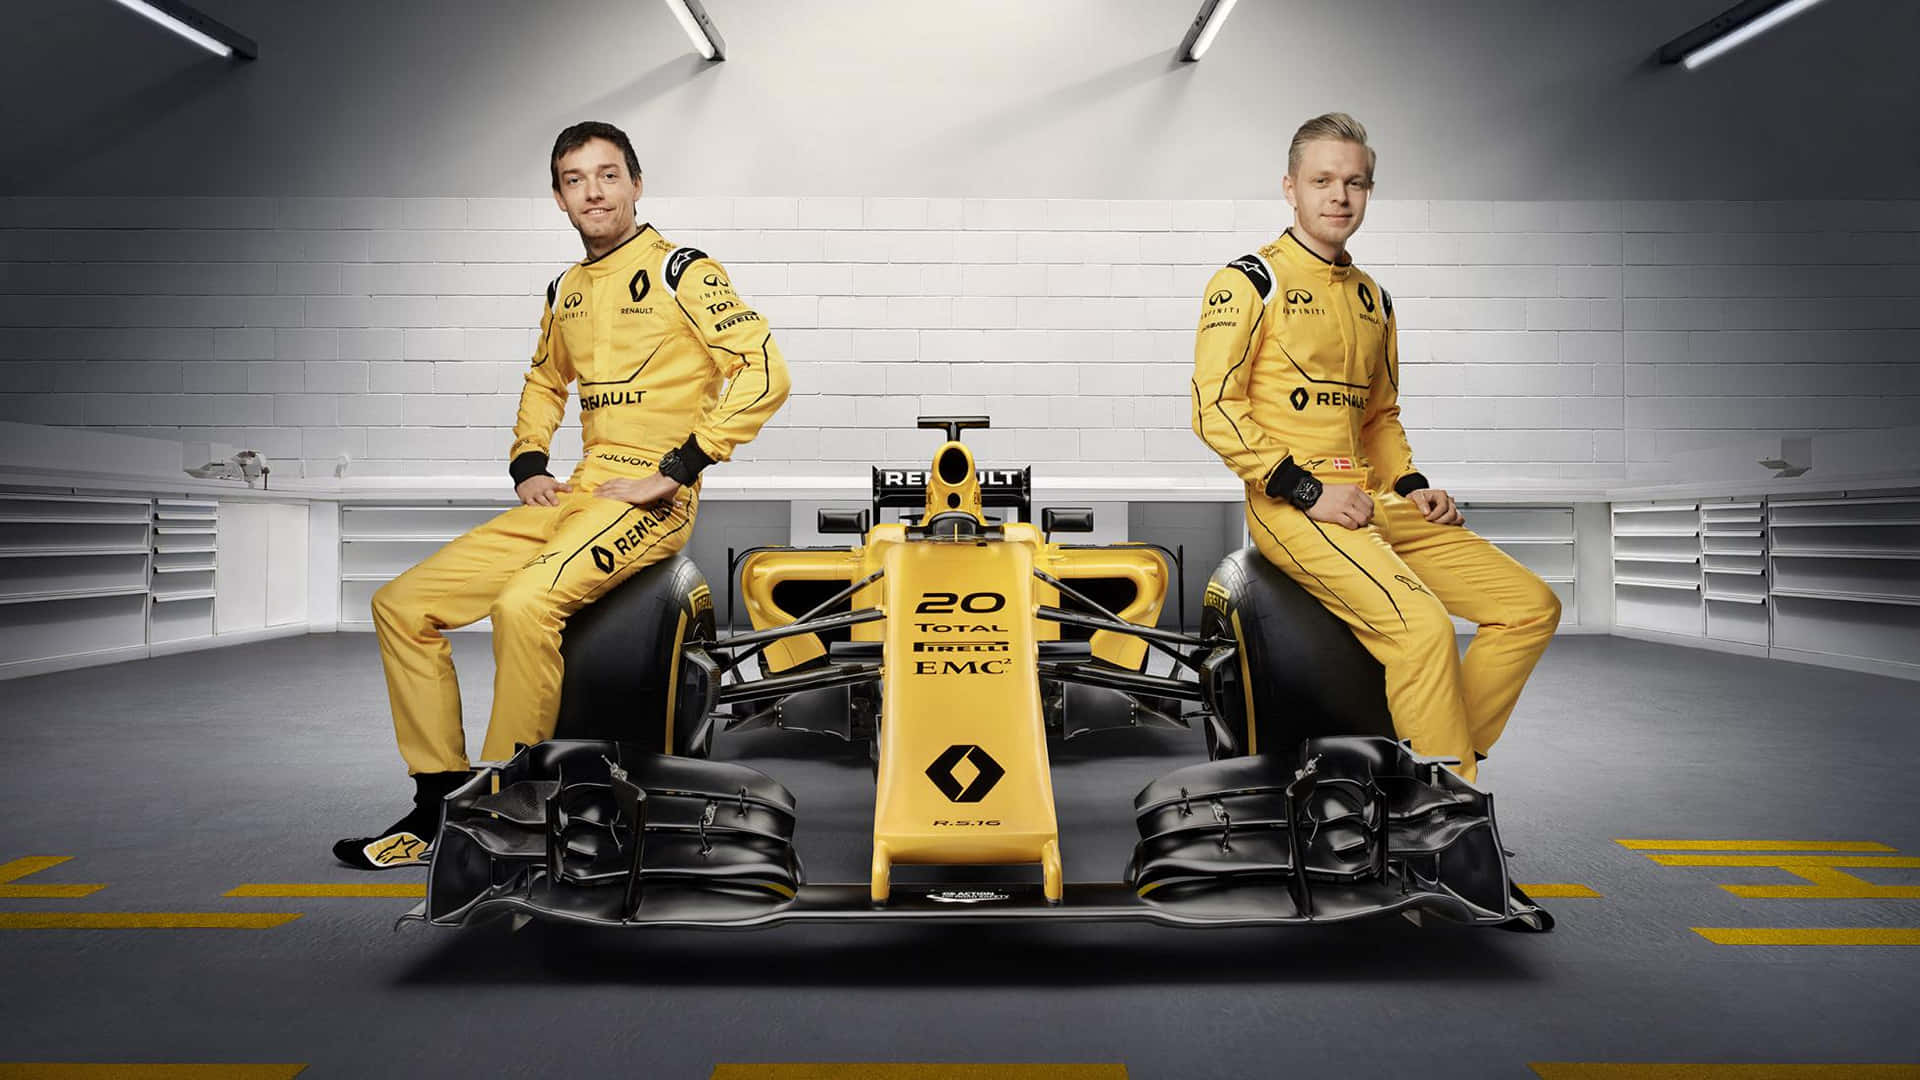 Two Men In Yellow Suits Pose Next To A Yellow Racing Car